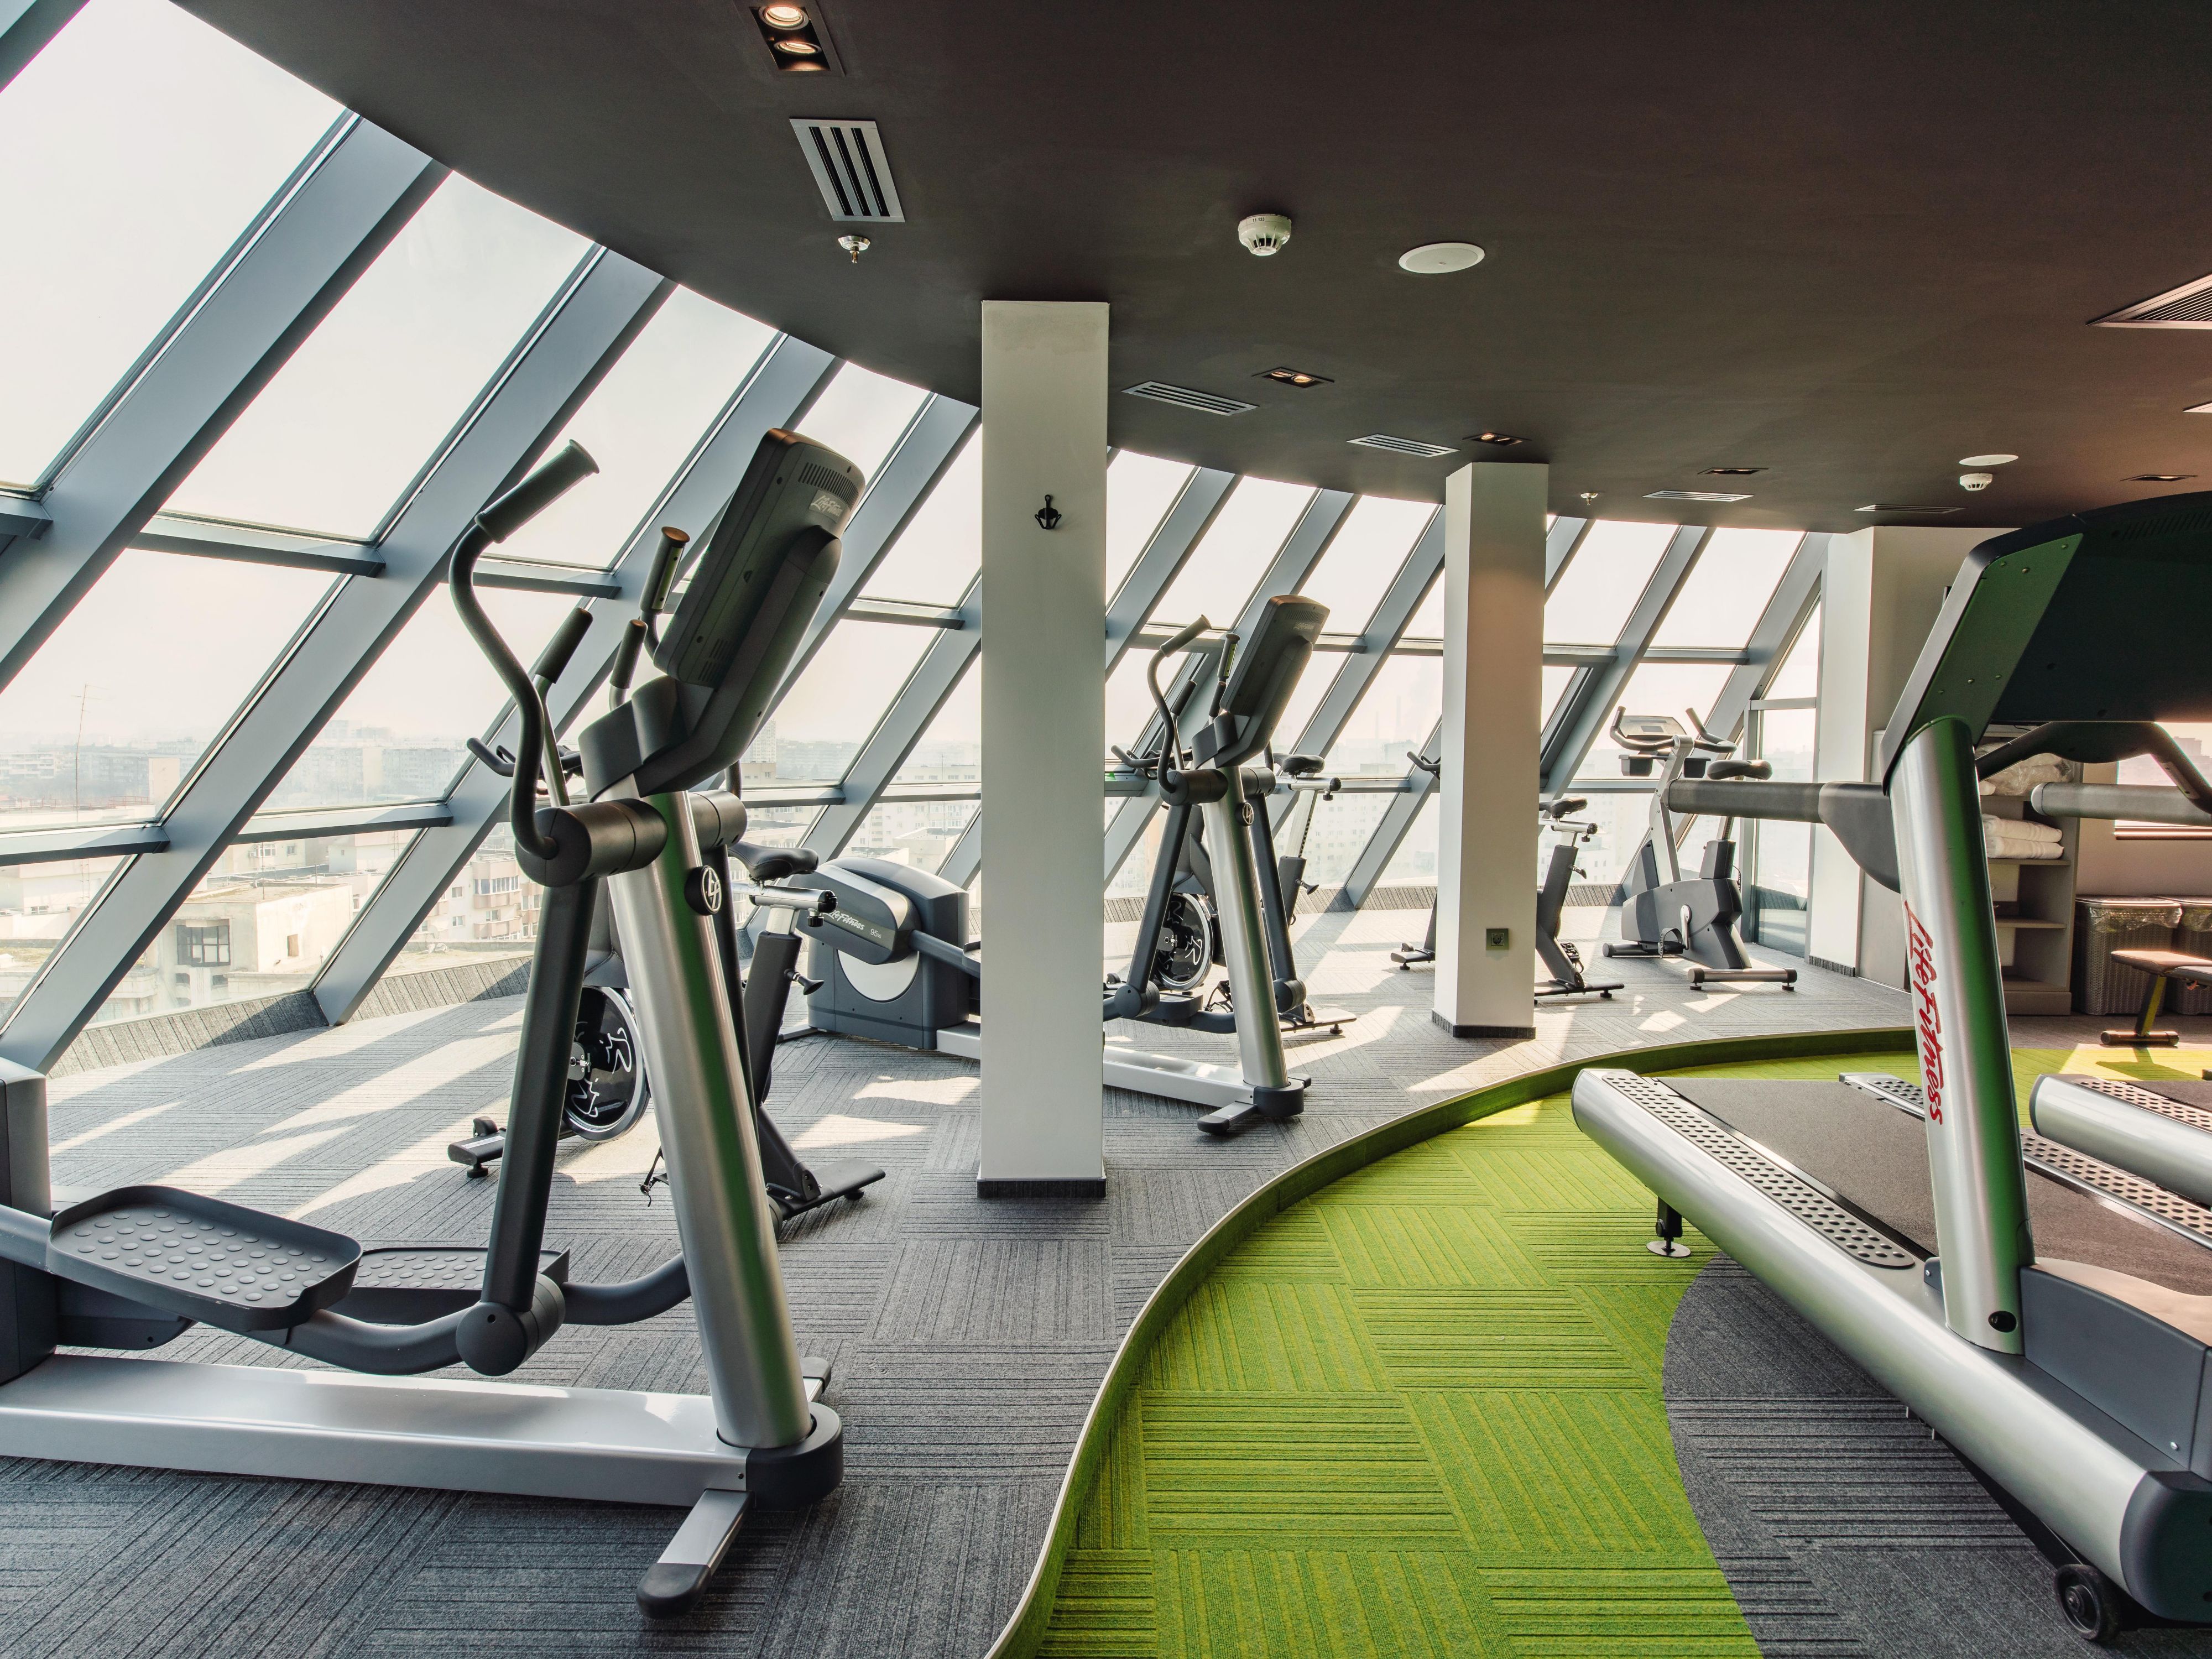 The “Up Fit Gym” Wellness and Fitness Centre, located on the top floor of the hotel, offers a panoramic view over the city and is equipped with state-of-the-art fitness equipment to which all guests will enjoy free access so that they can keep their exercise routine even when they are away from home!